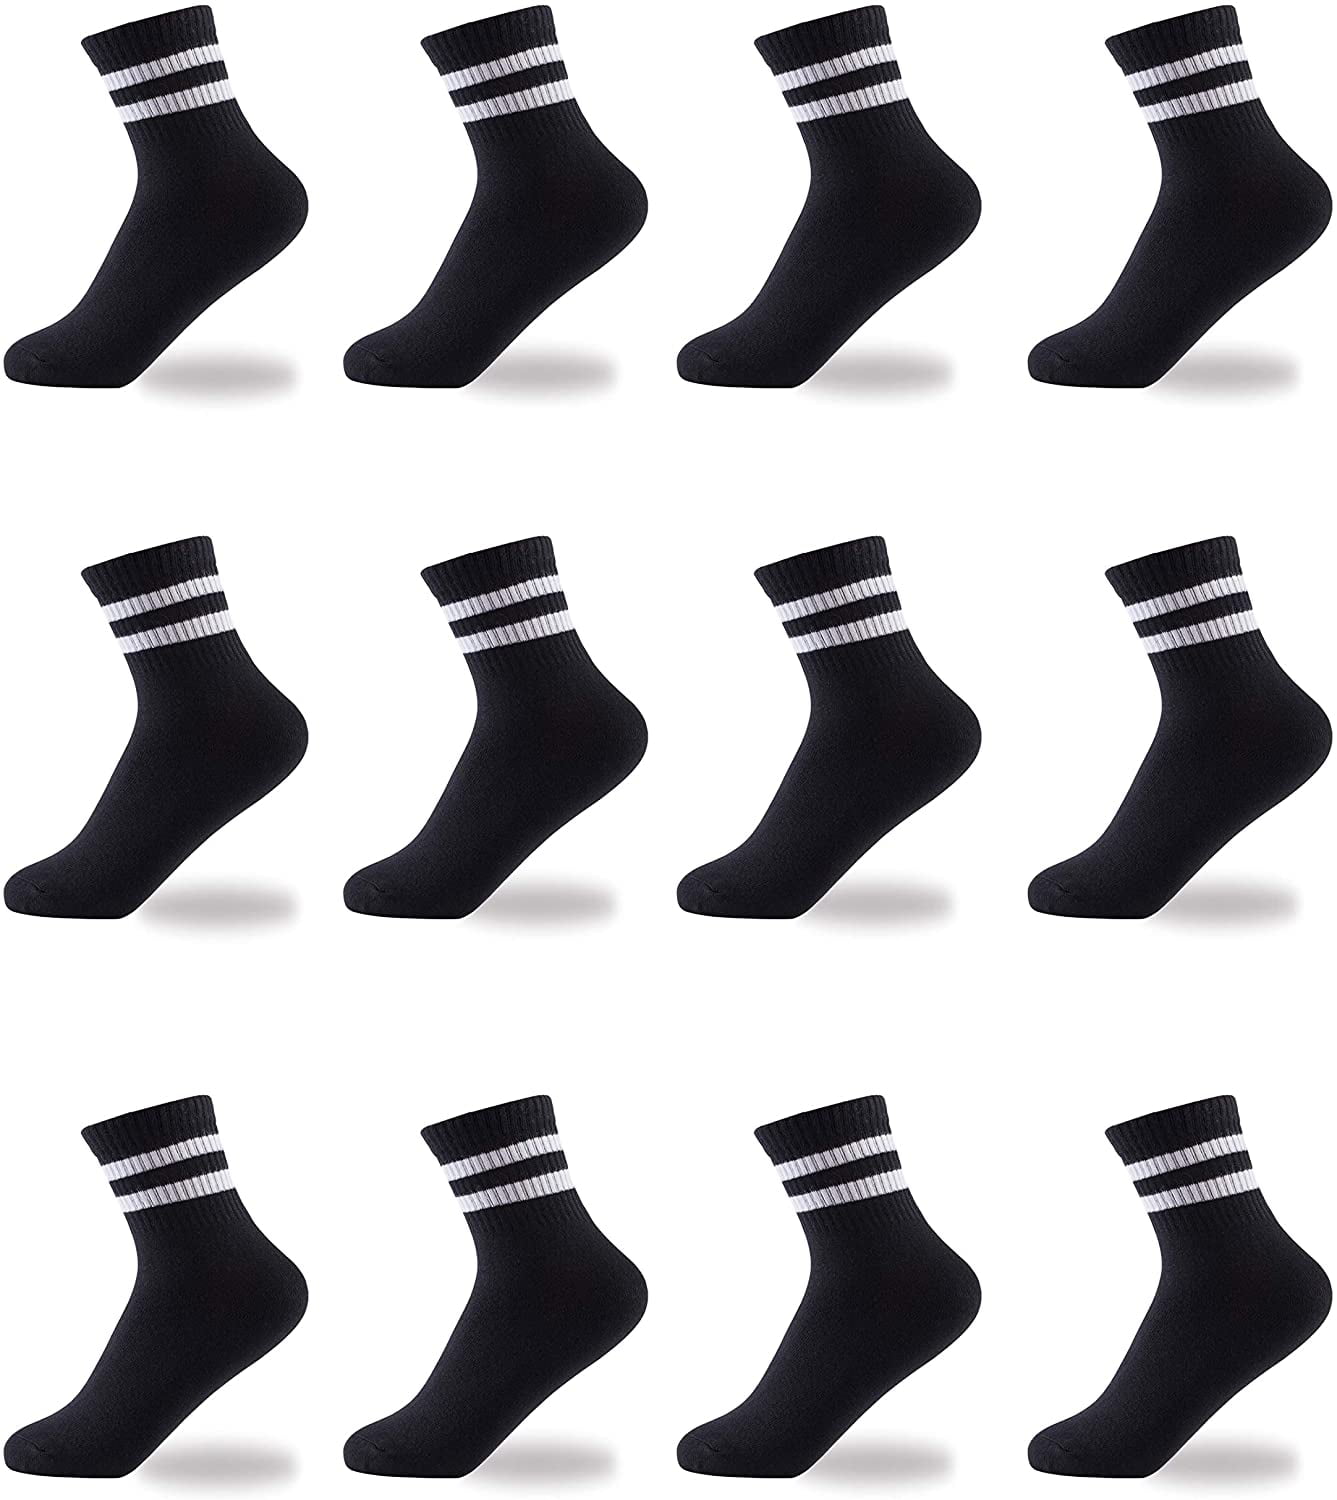 Oohmy Boys Socks 12 Packs Fit for 2-12 Years Old Boys and Girls Cotton Athletic Ankle Socks for Toddler Kids and Big Kids 